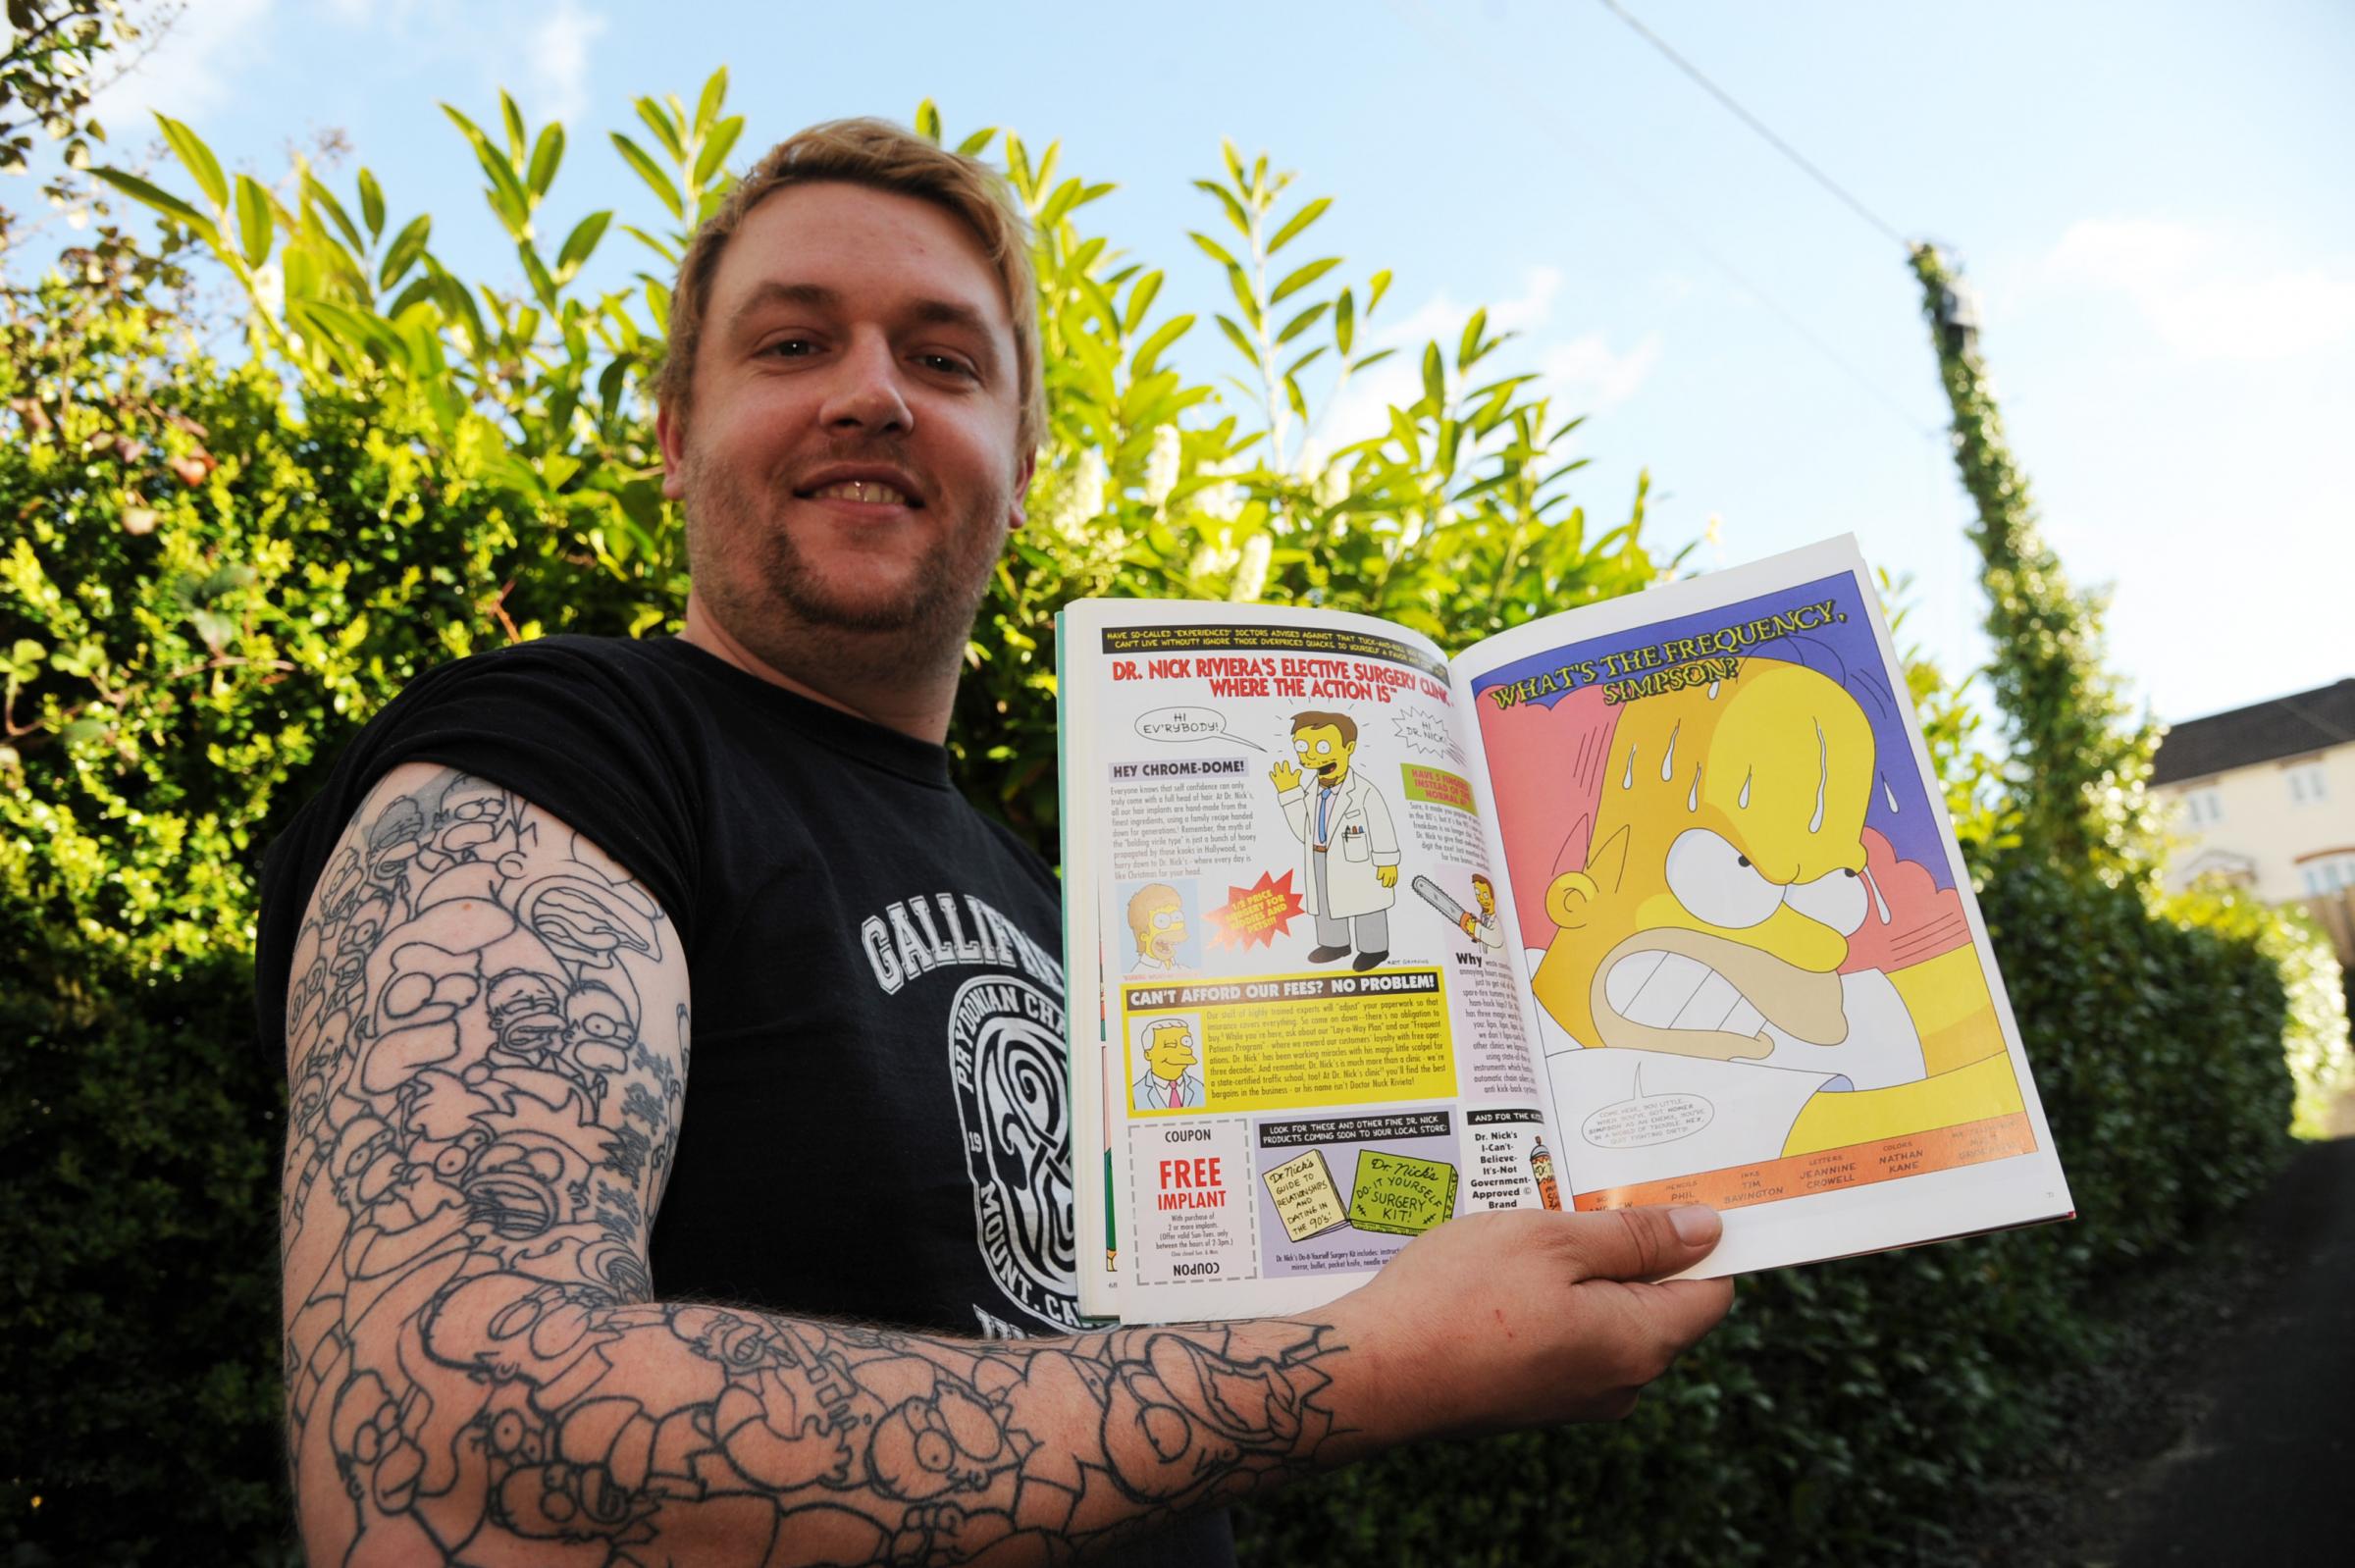 D Oh Simpsons Mega Fan Covers Arm In 53 Homer Tattoos In World Record Bid Wiltshire Times